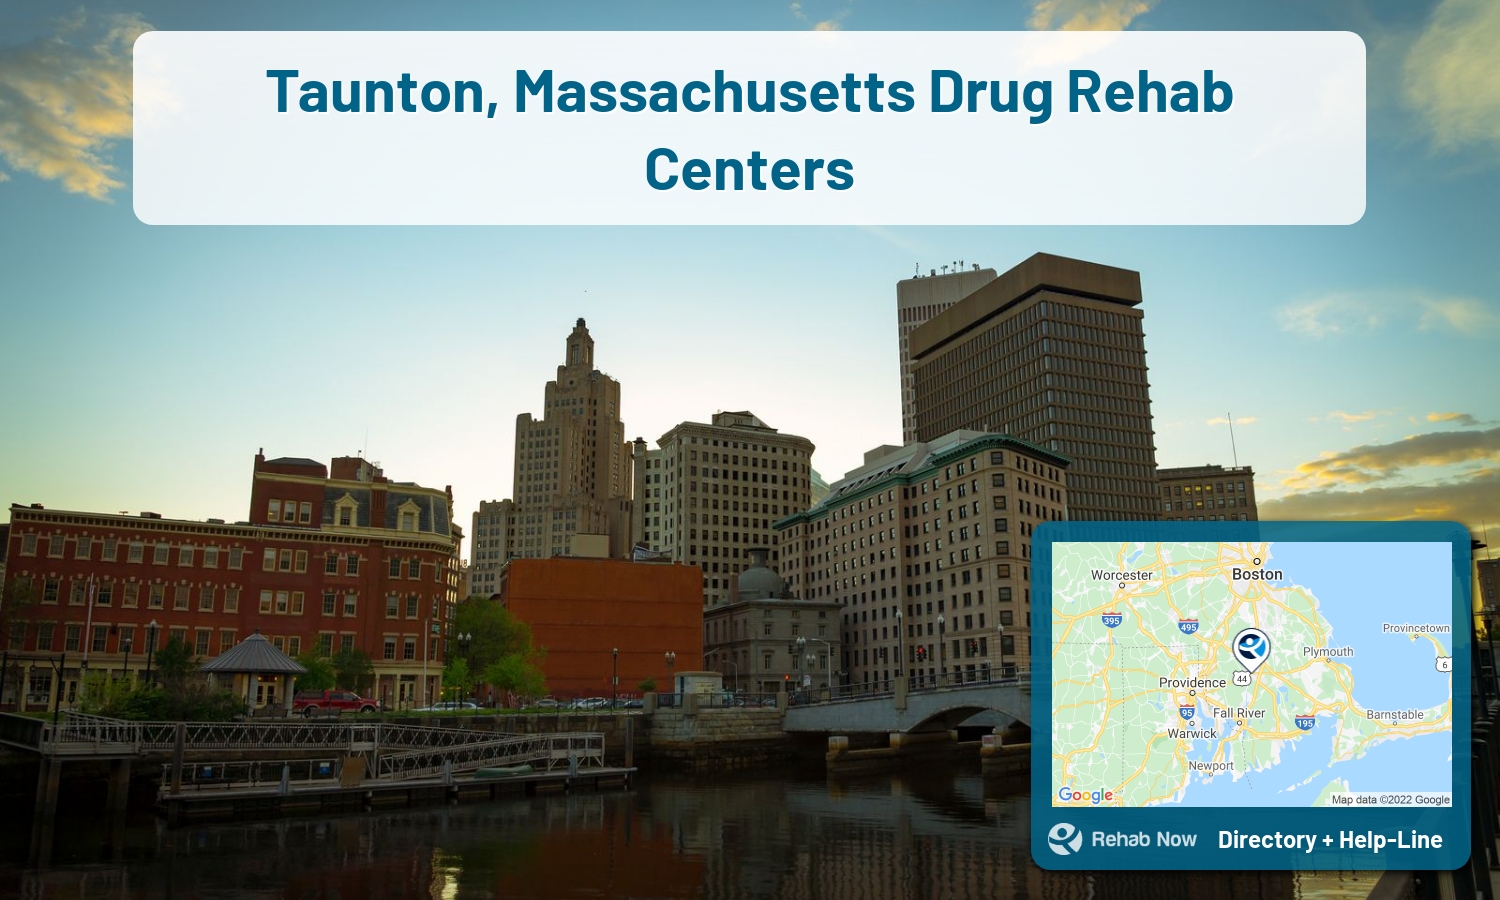 Taunton, MA Treatment Centers. Find drug rehab in Taunton, Massachusetts, or detox and treatment programs. Get the right help now!